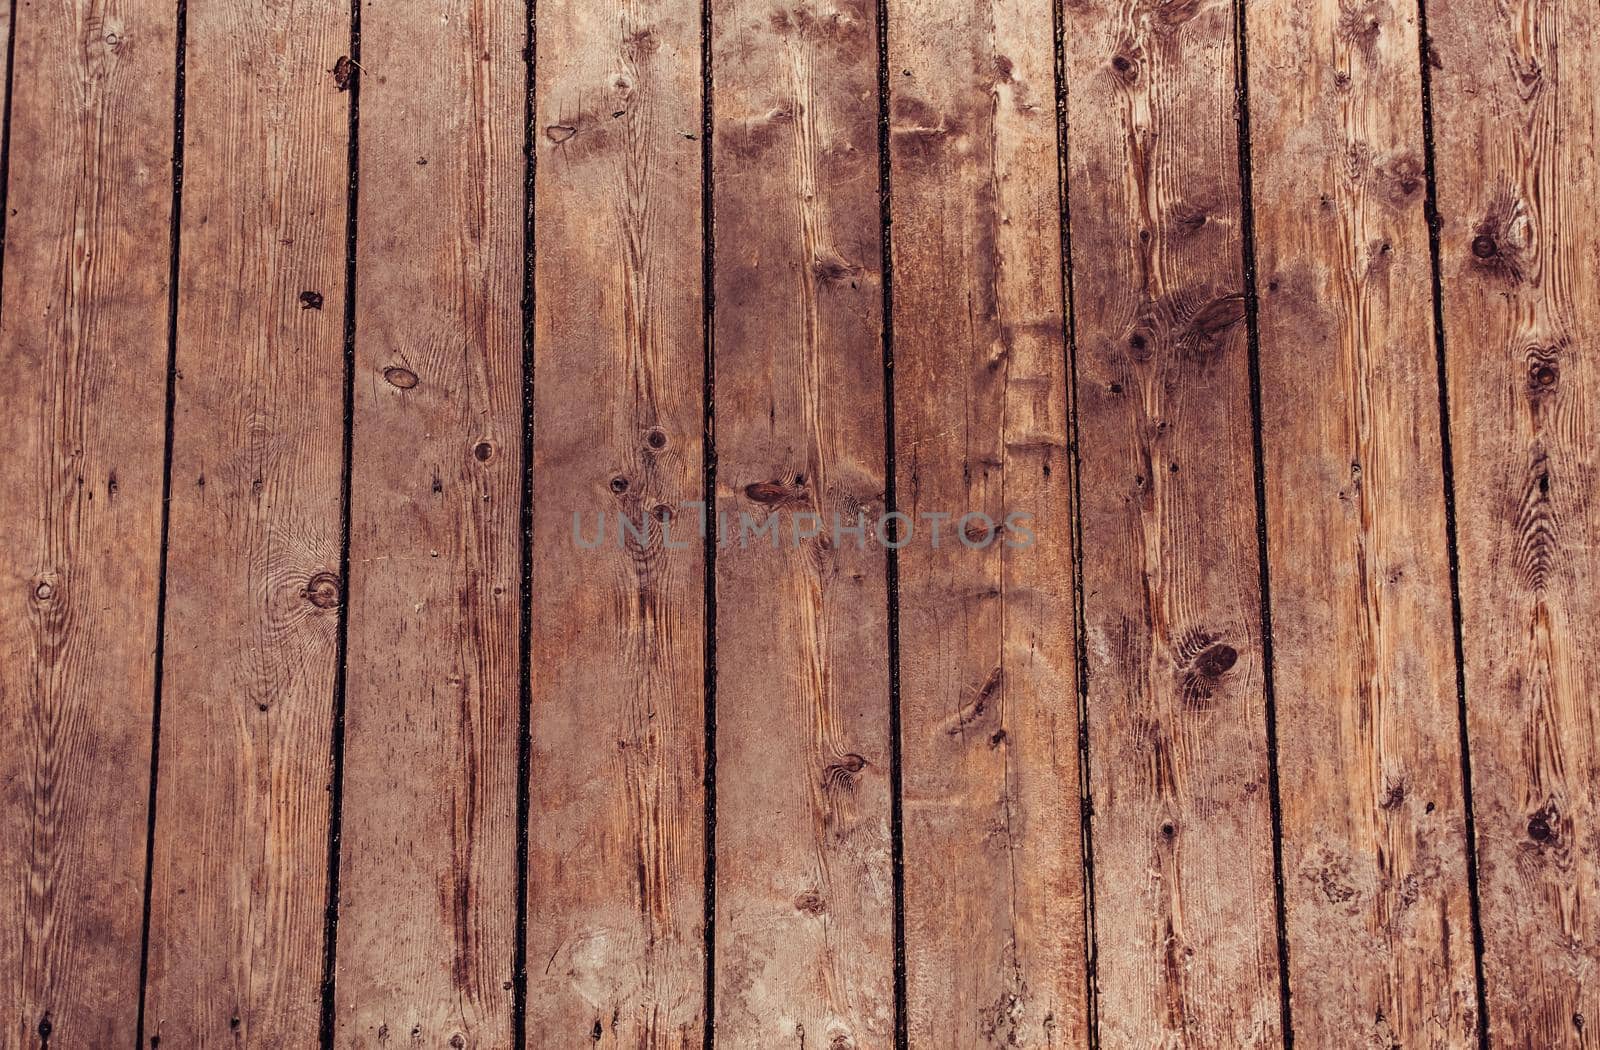 Background of vertical brown wooden planks.